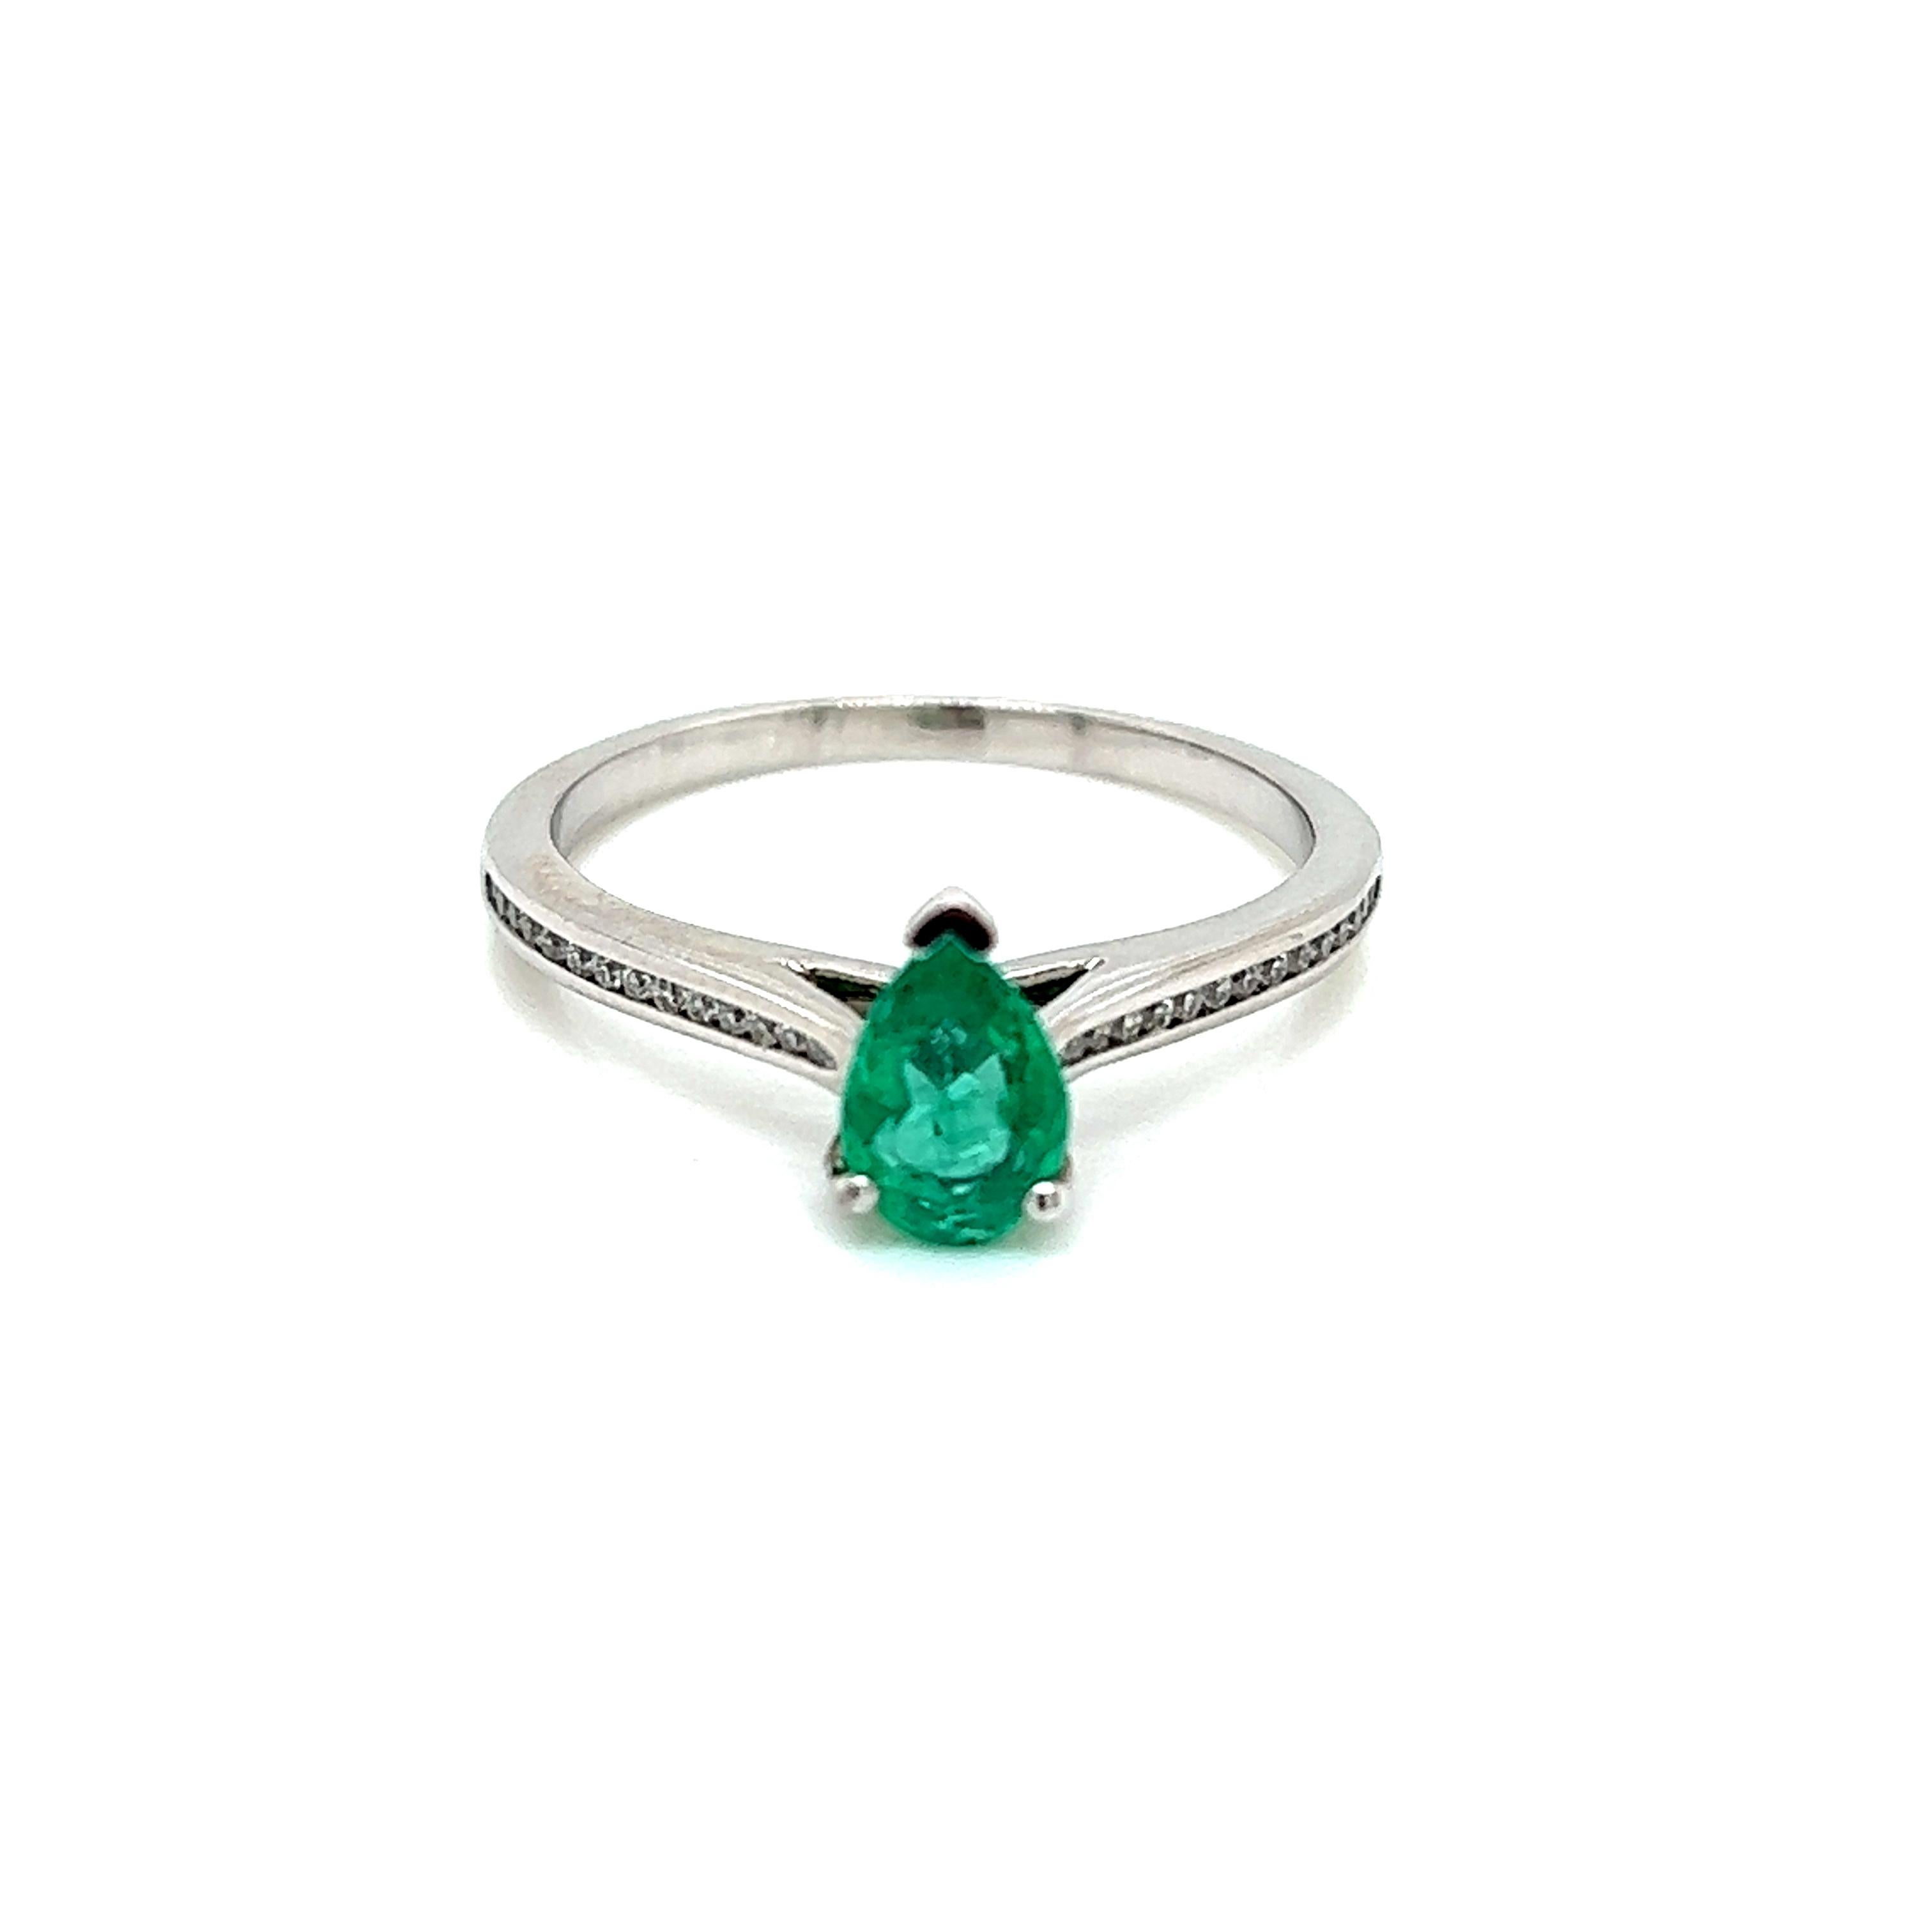 0.45 Carat Pear Shape Emerald and Diamond Ring in 18 Karat White Gold

This gorgeous ring features a luscious pear-cut Emerald held in a claw setting on a Diamond encrusted 18K White Gold band.

The Emerald weighs a total of 0.45 carats. It is an